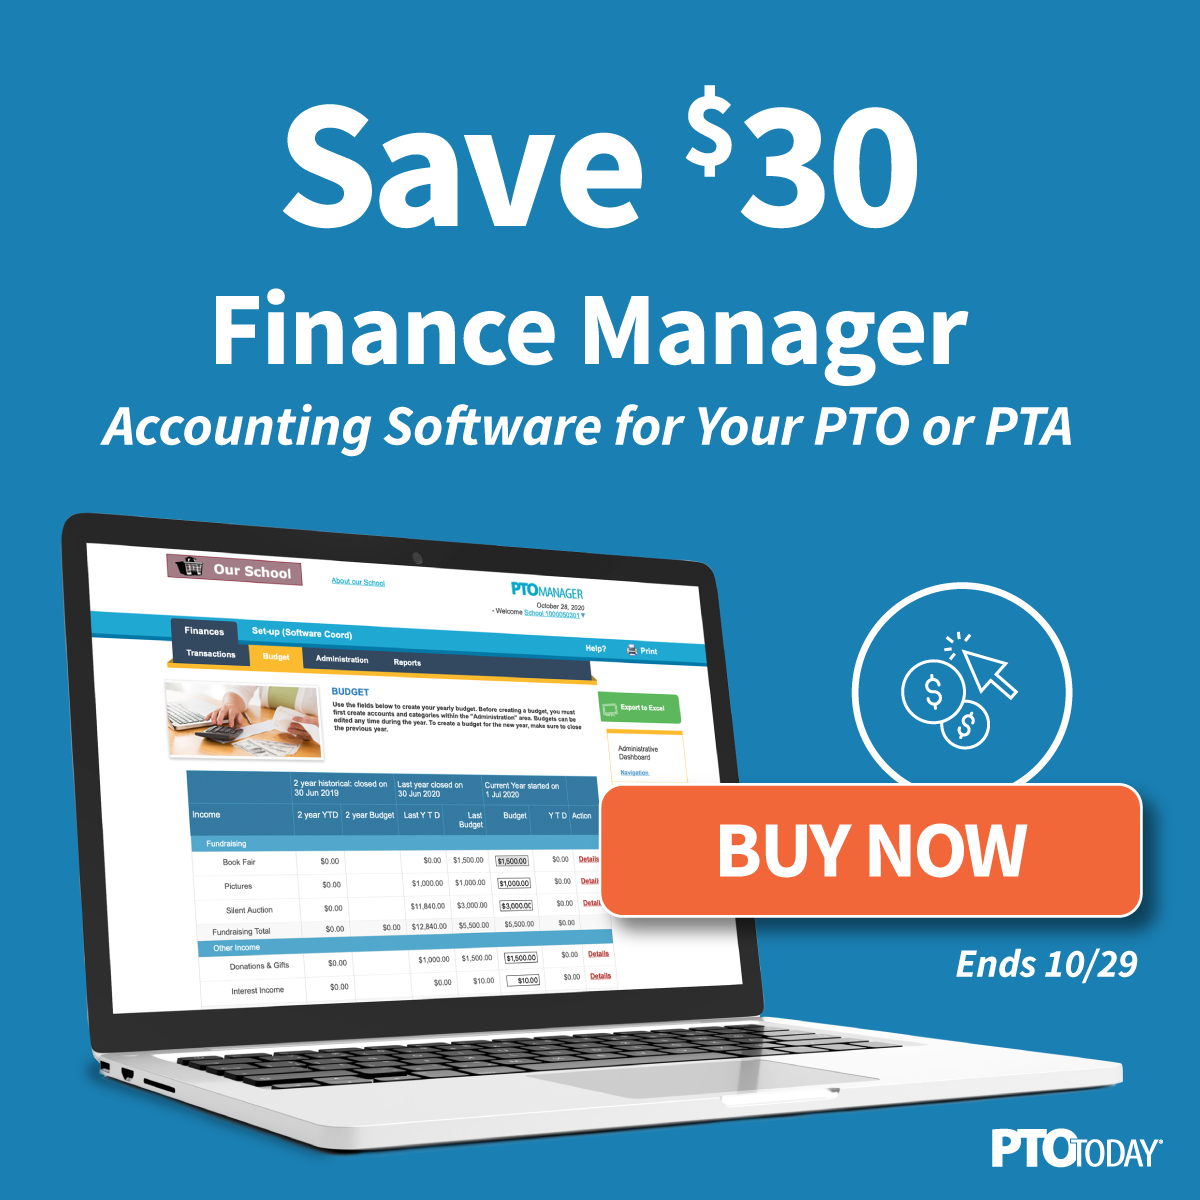 Get your Finance Manager savings